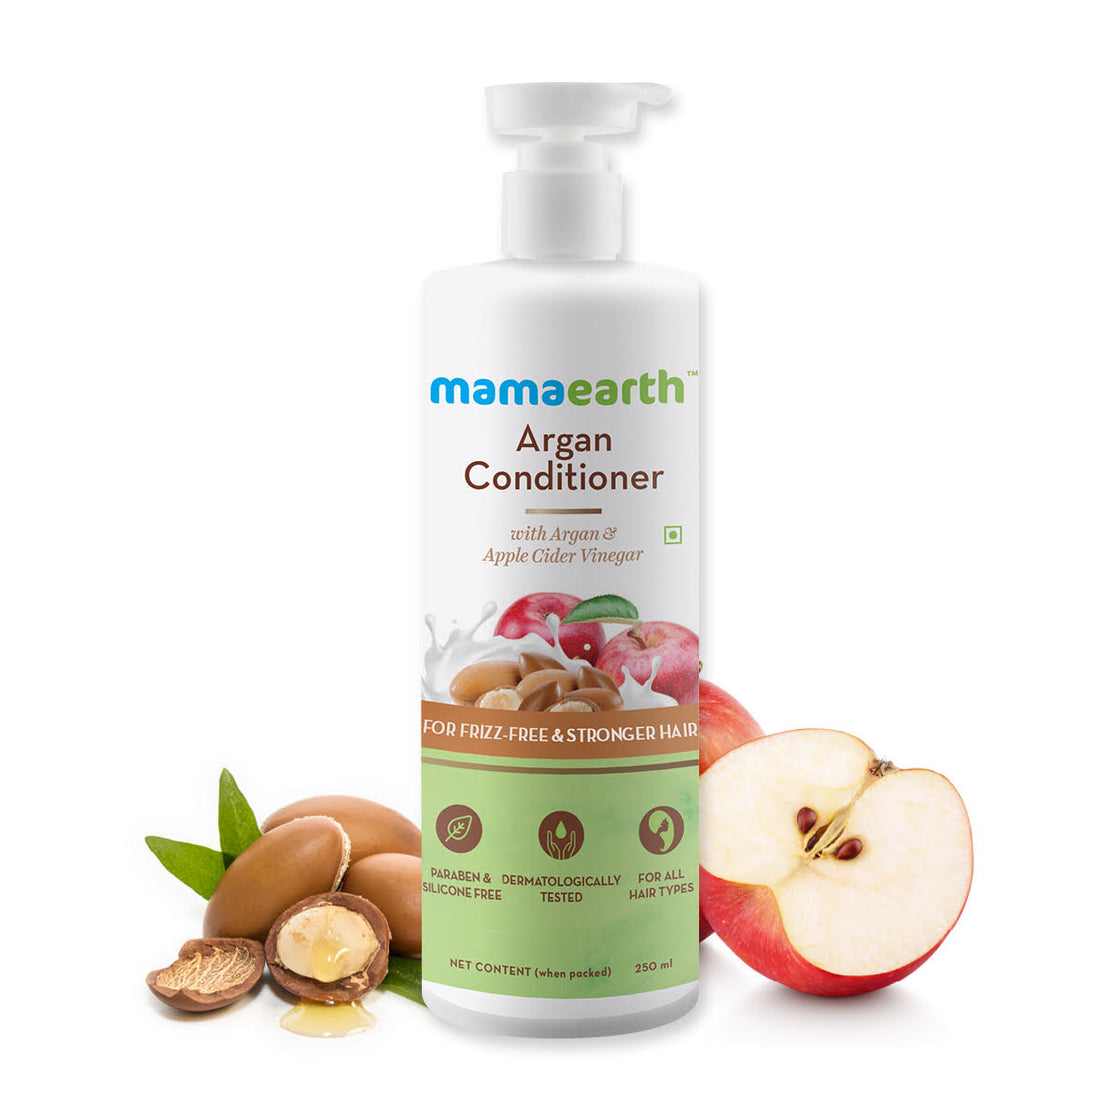 Mamaearth Argan & Apple Cider Vinegar Conditioner For Dry & Frizzy Hair-2